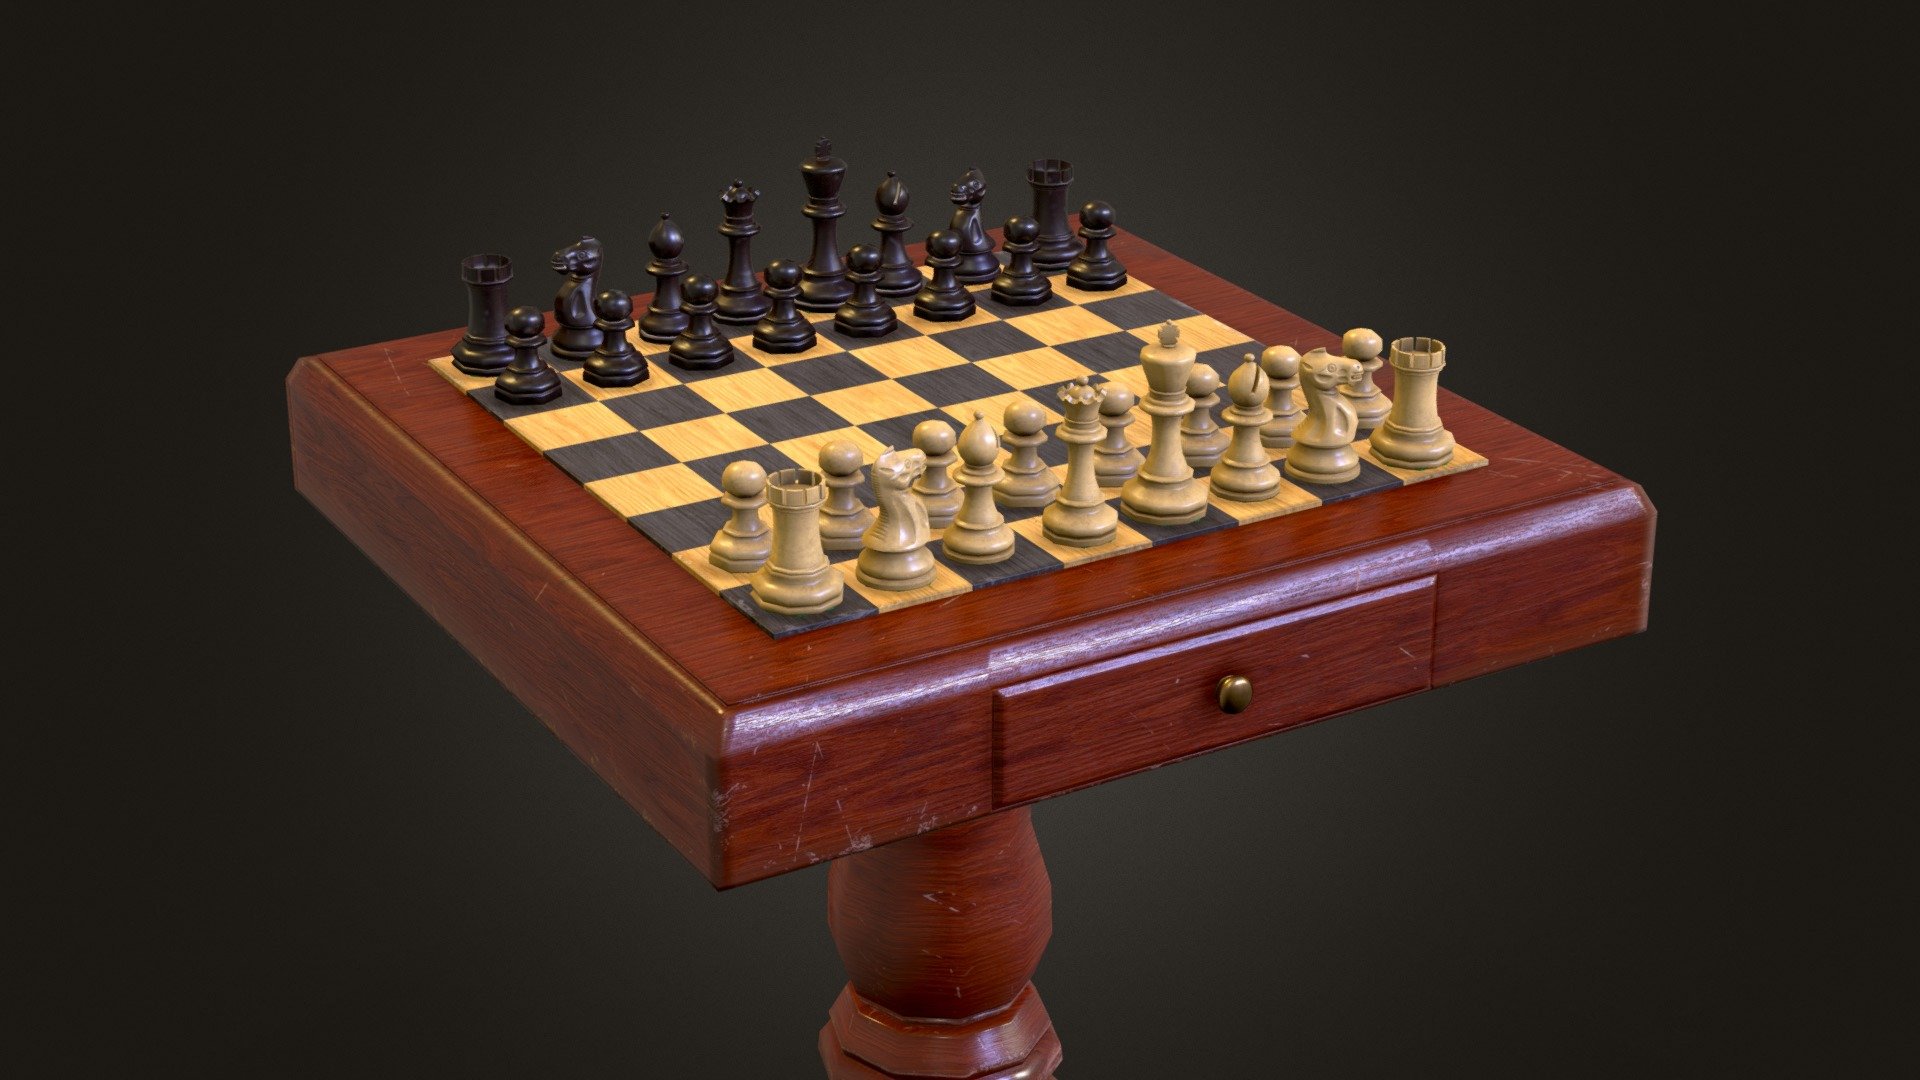 3D Old Chessboard. It's a very good model with good geometry and textures. The pieces are also very high-detailed even in low-poly. 

PBR materials

Textures size: 4096 x 4096

File's unit: centimeters - Chessboard Table - Buy Royalty Free 3D model by nigam (@nigamxcreations) 3d model